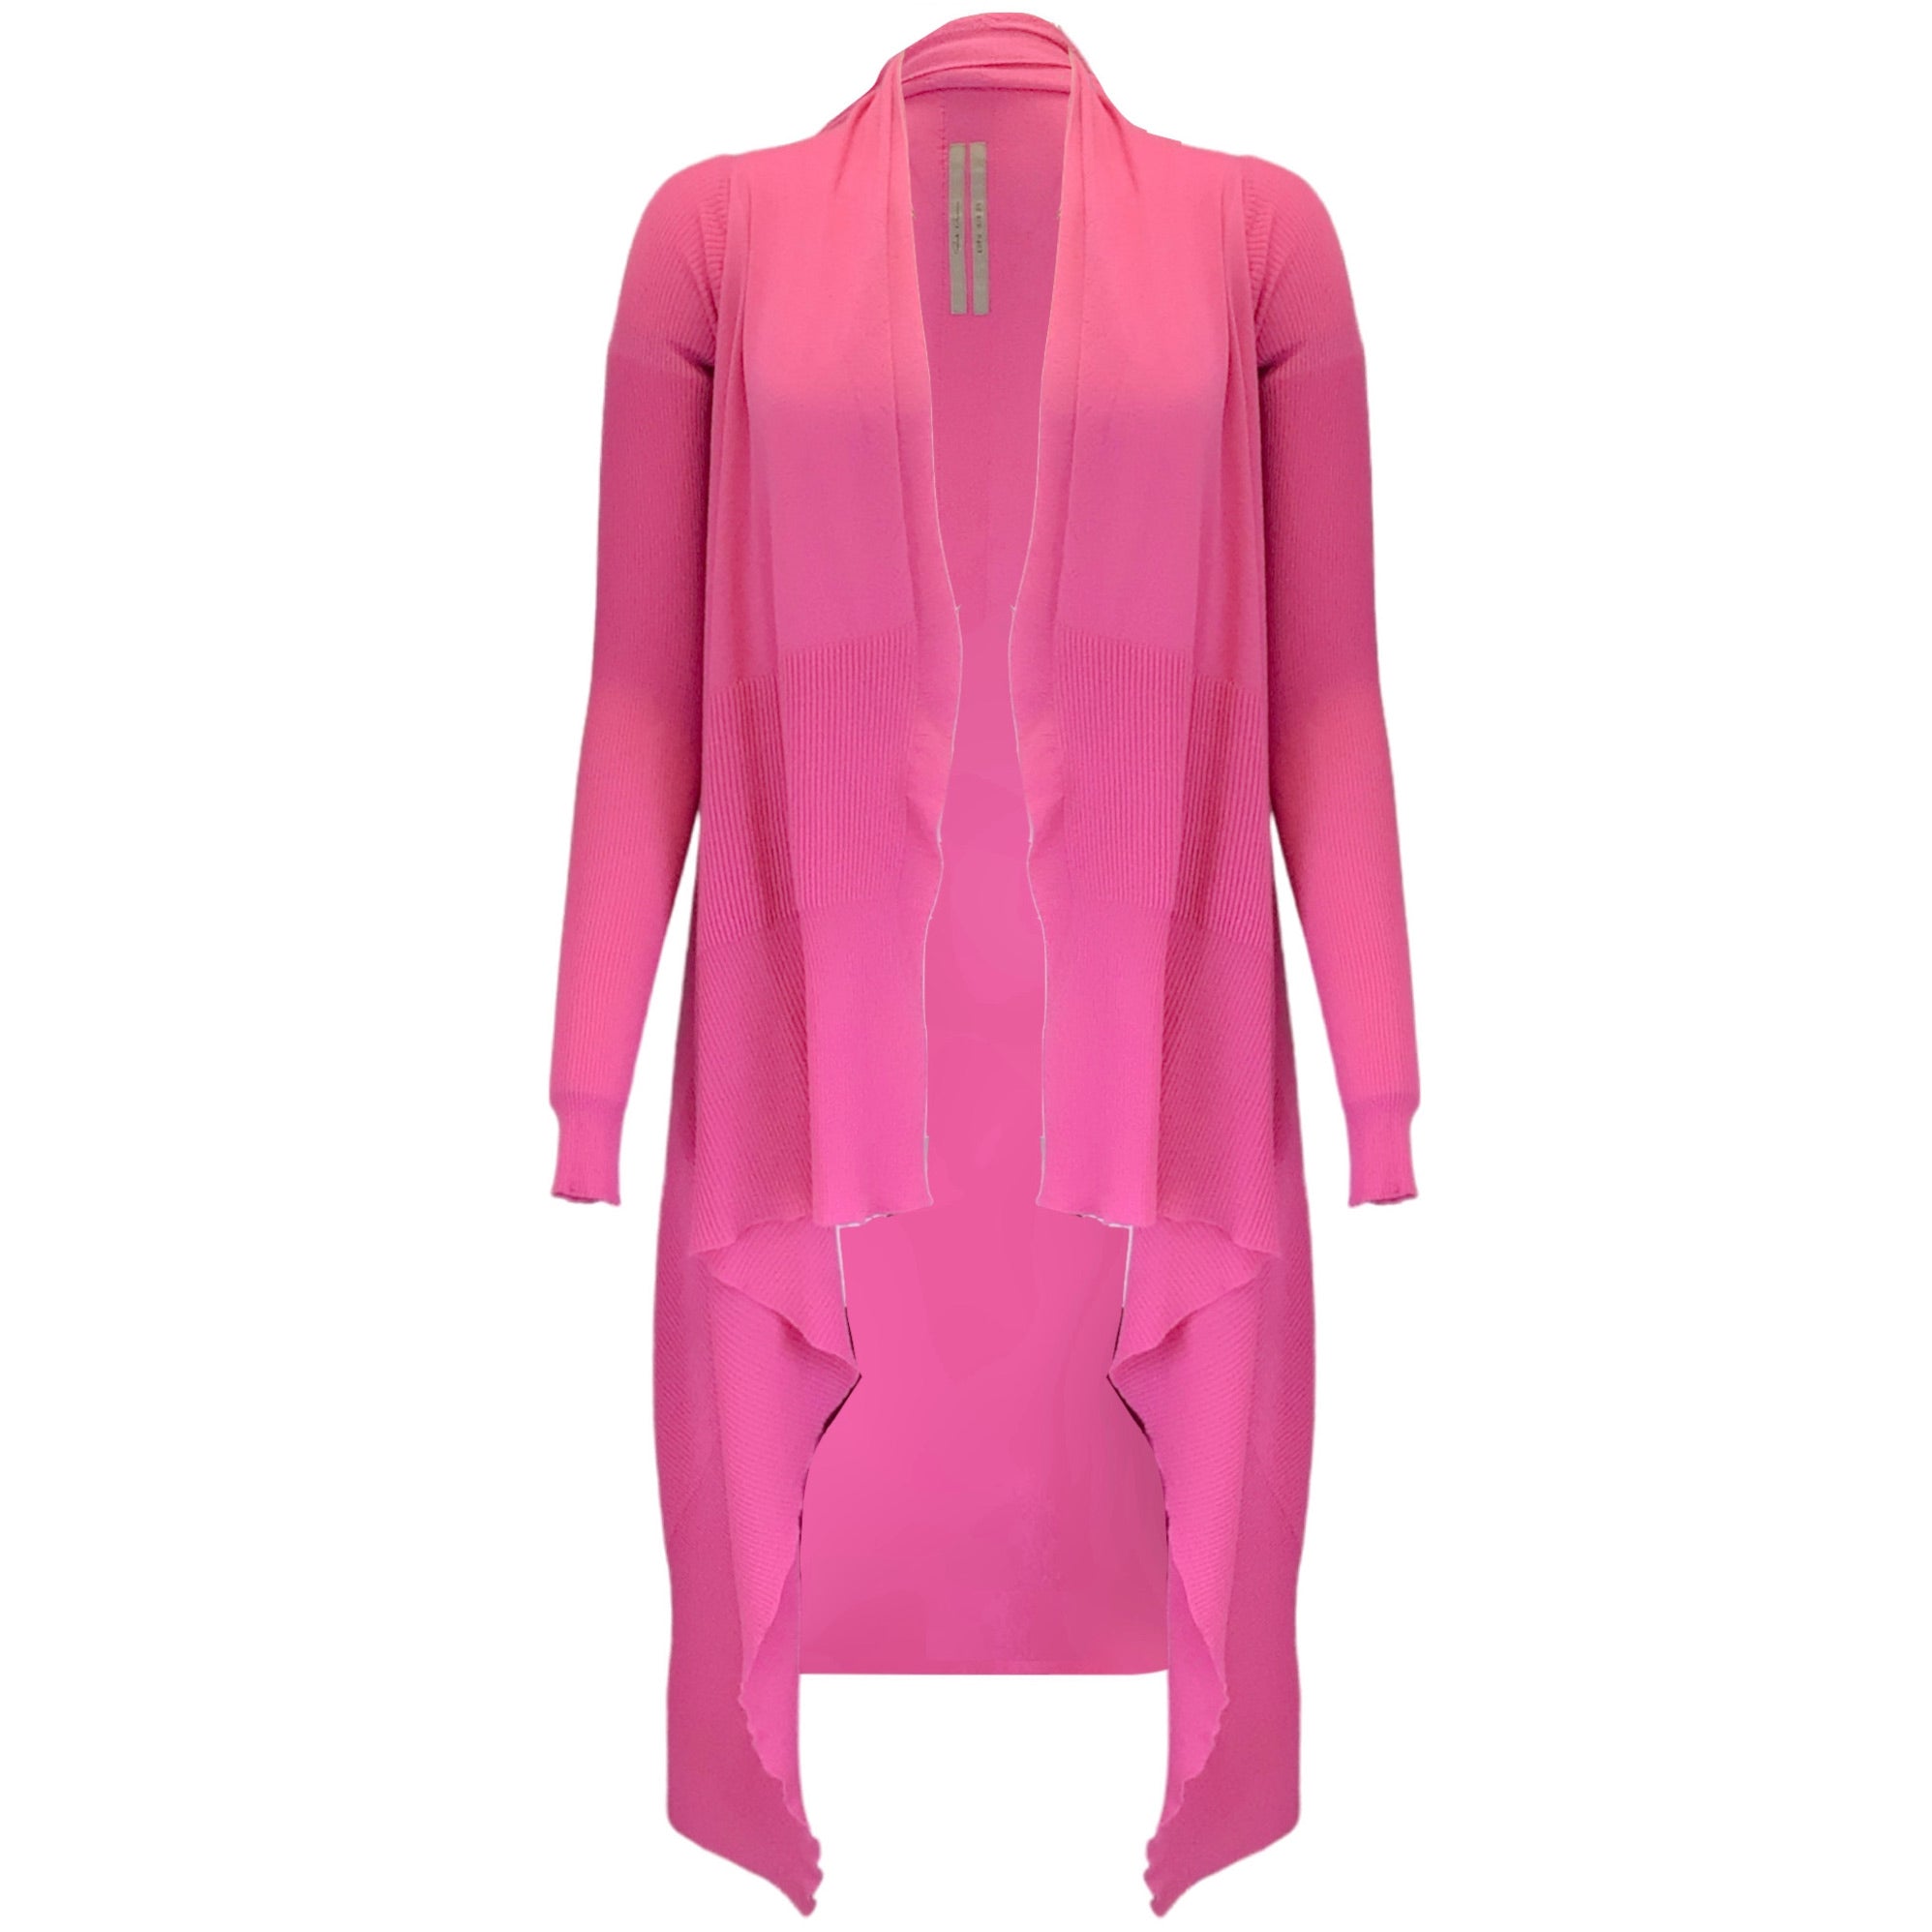 Rick Owens Hot Pink Open Long Cashmere Knit Cardigan Sweater